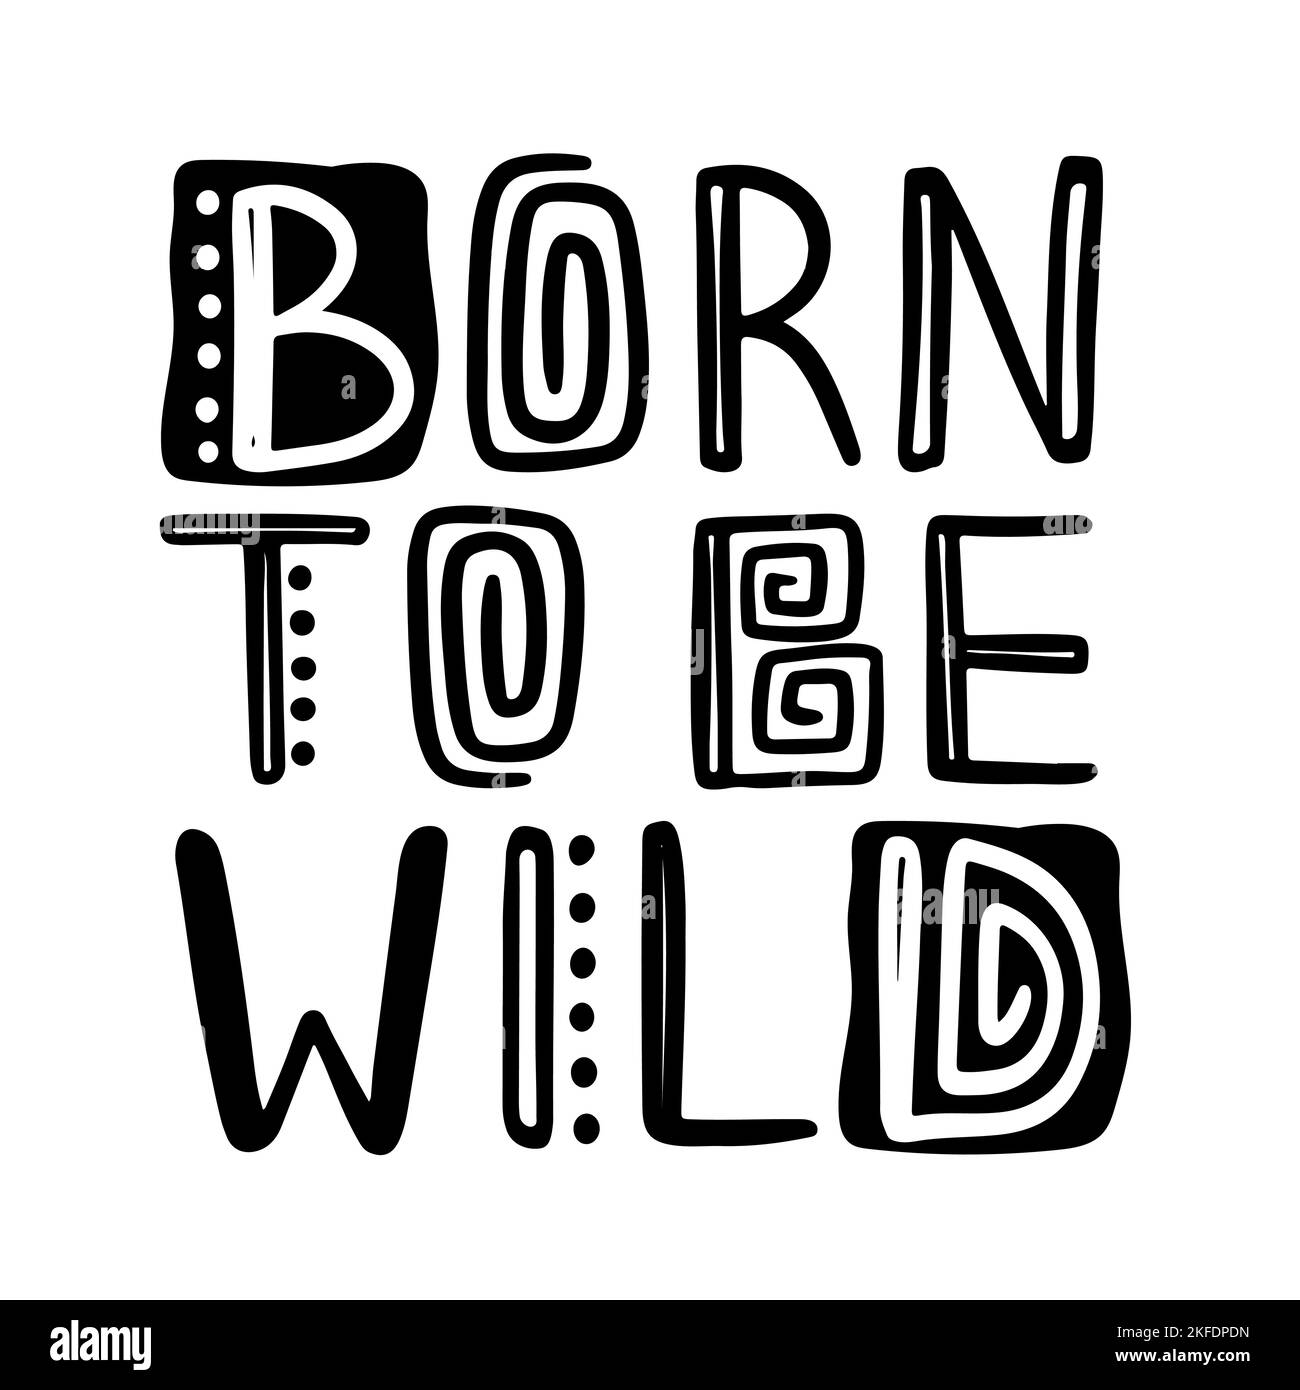 BORN TO BE WILD Monochrome Quote Lettering Black Text On White Background In Modern Style Vector Illustration Set For Print Stock Vector